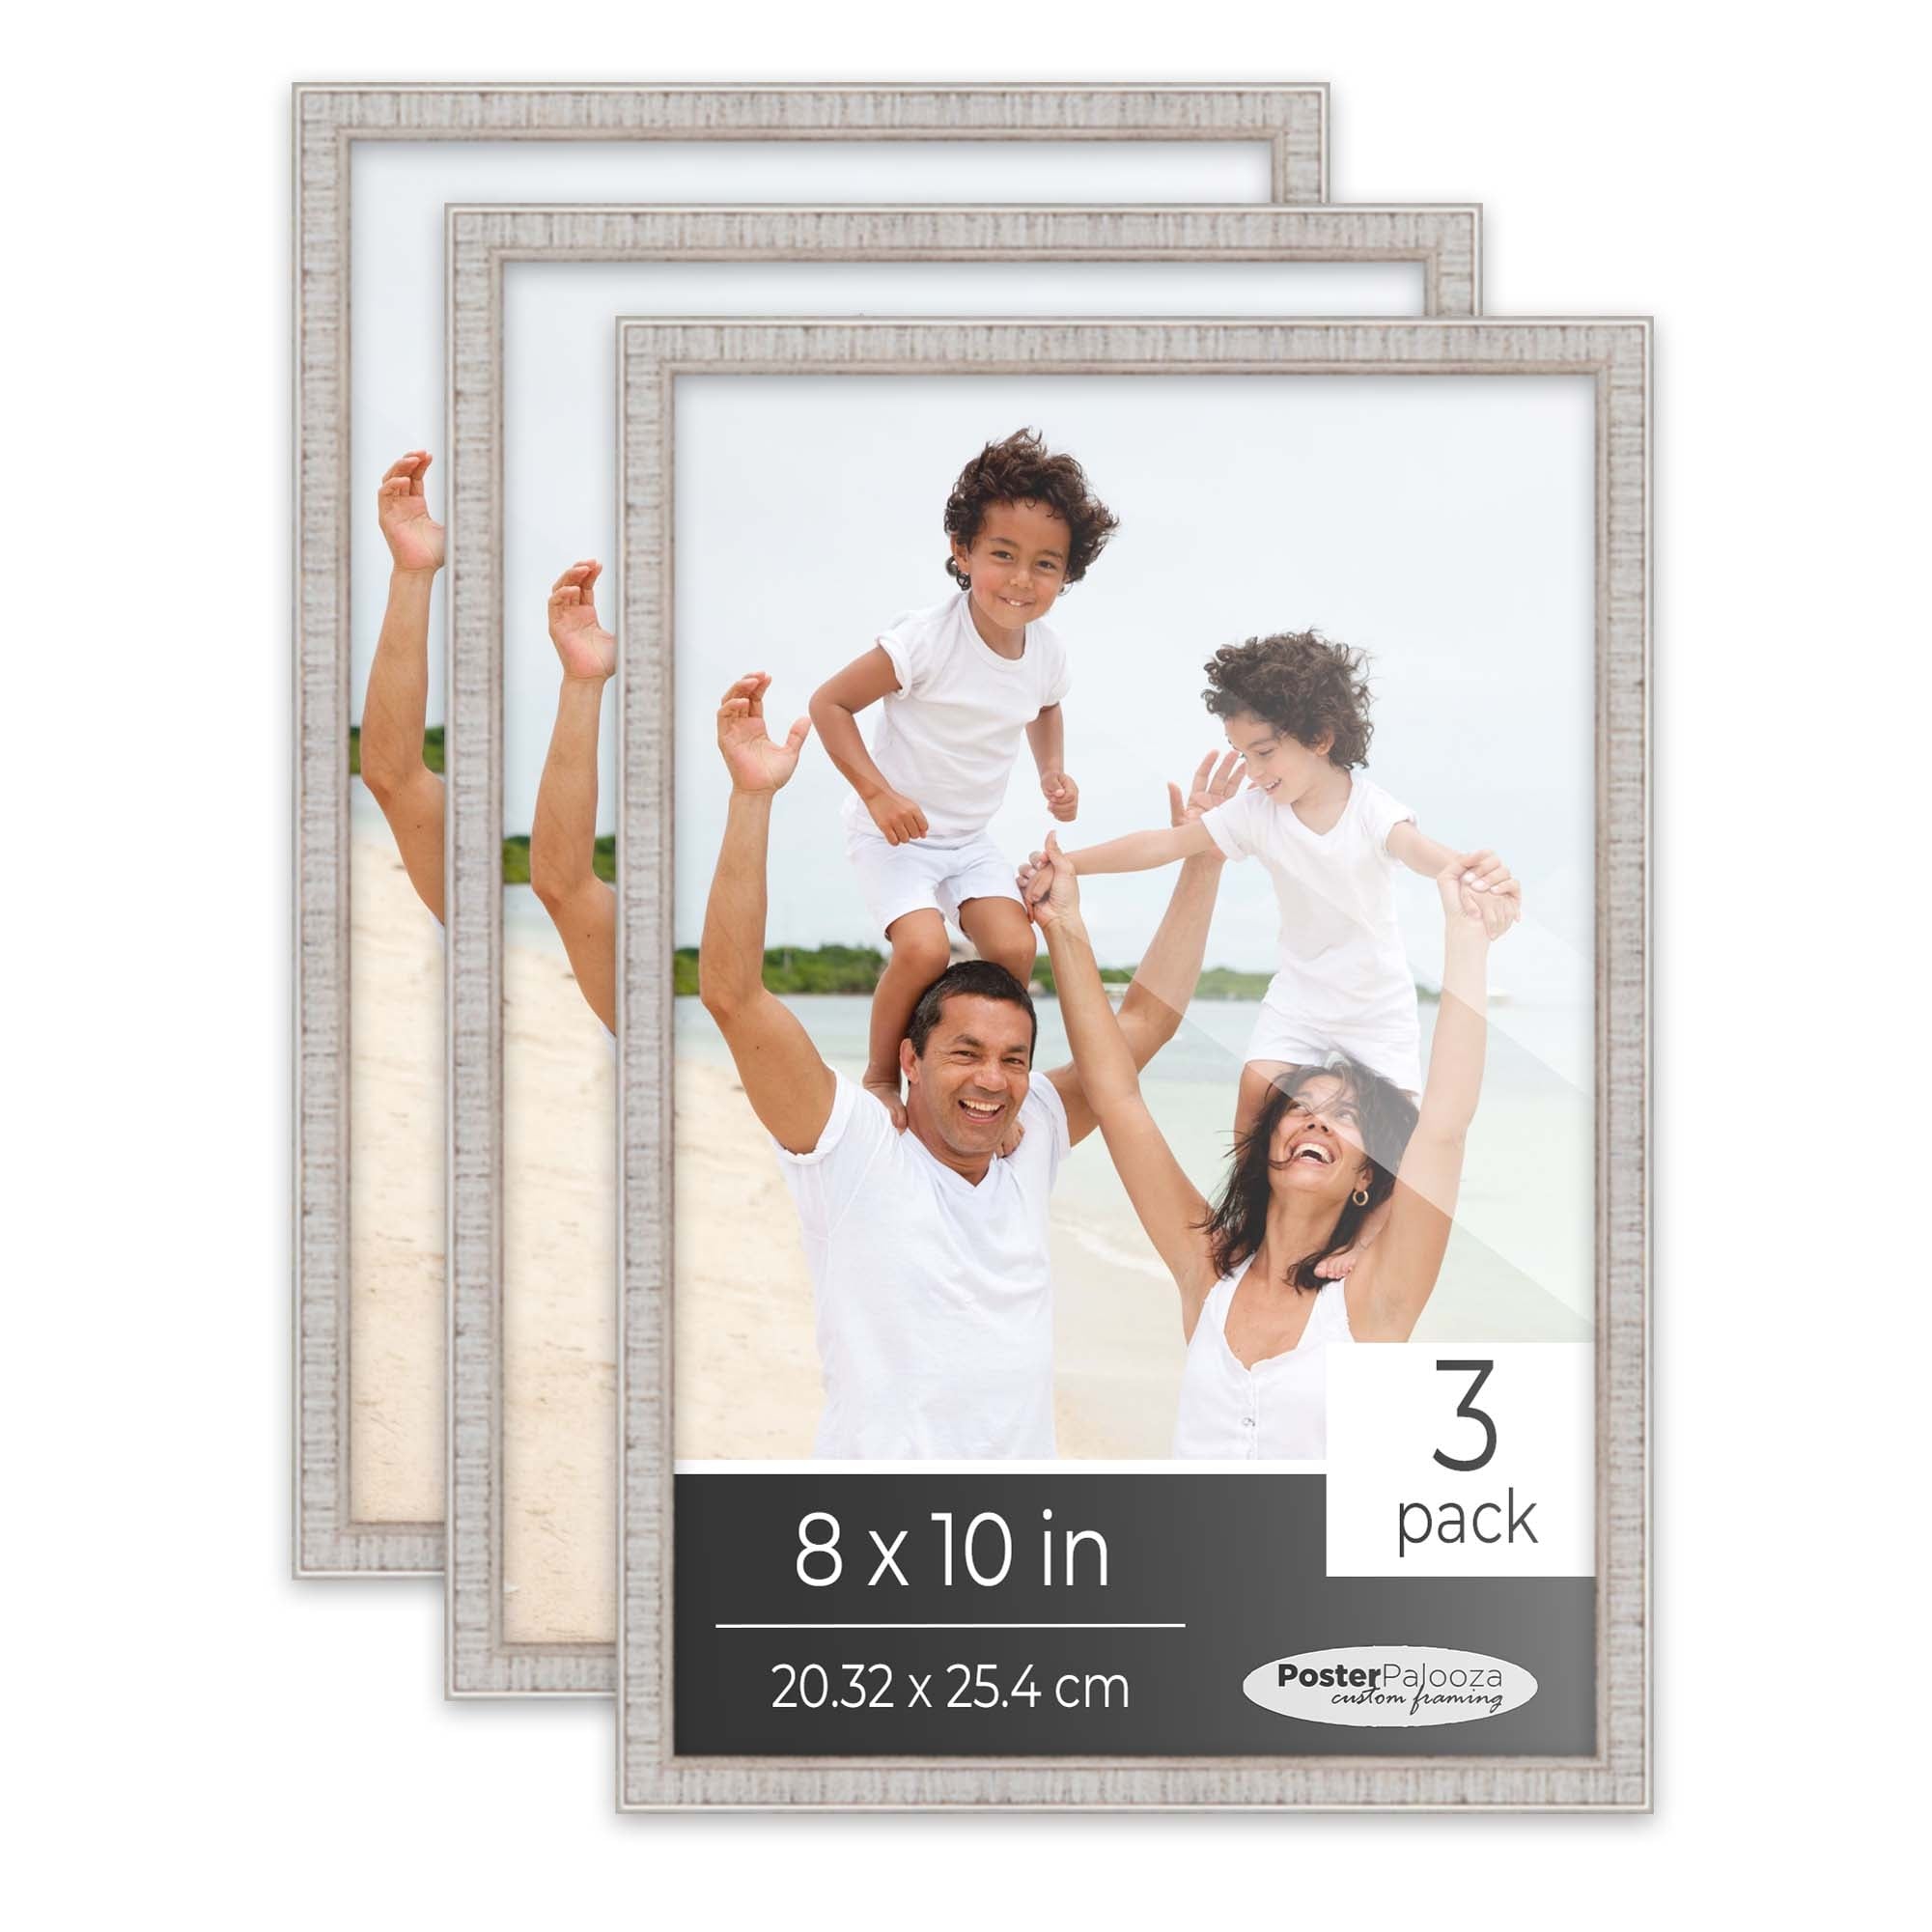 https://ak1.ostkcdn.com/images/products/is/images/direct/14b35cd344524c28c94c5b65860edac458829e26/8x10-Rustic-White-Picture-Frame-Set-Pack-of-3-8x10-Wood-Picture-Frames-for-Gallery-Wall-3-8x10-Rustic-White-Frames.jpg